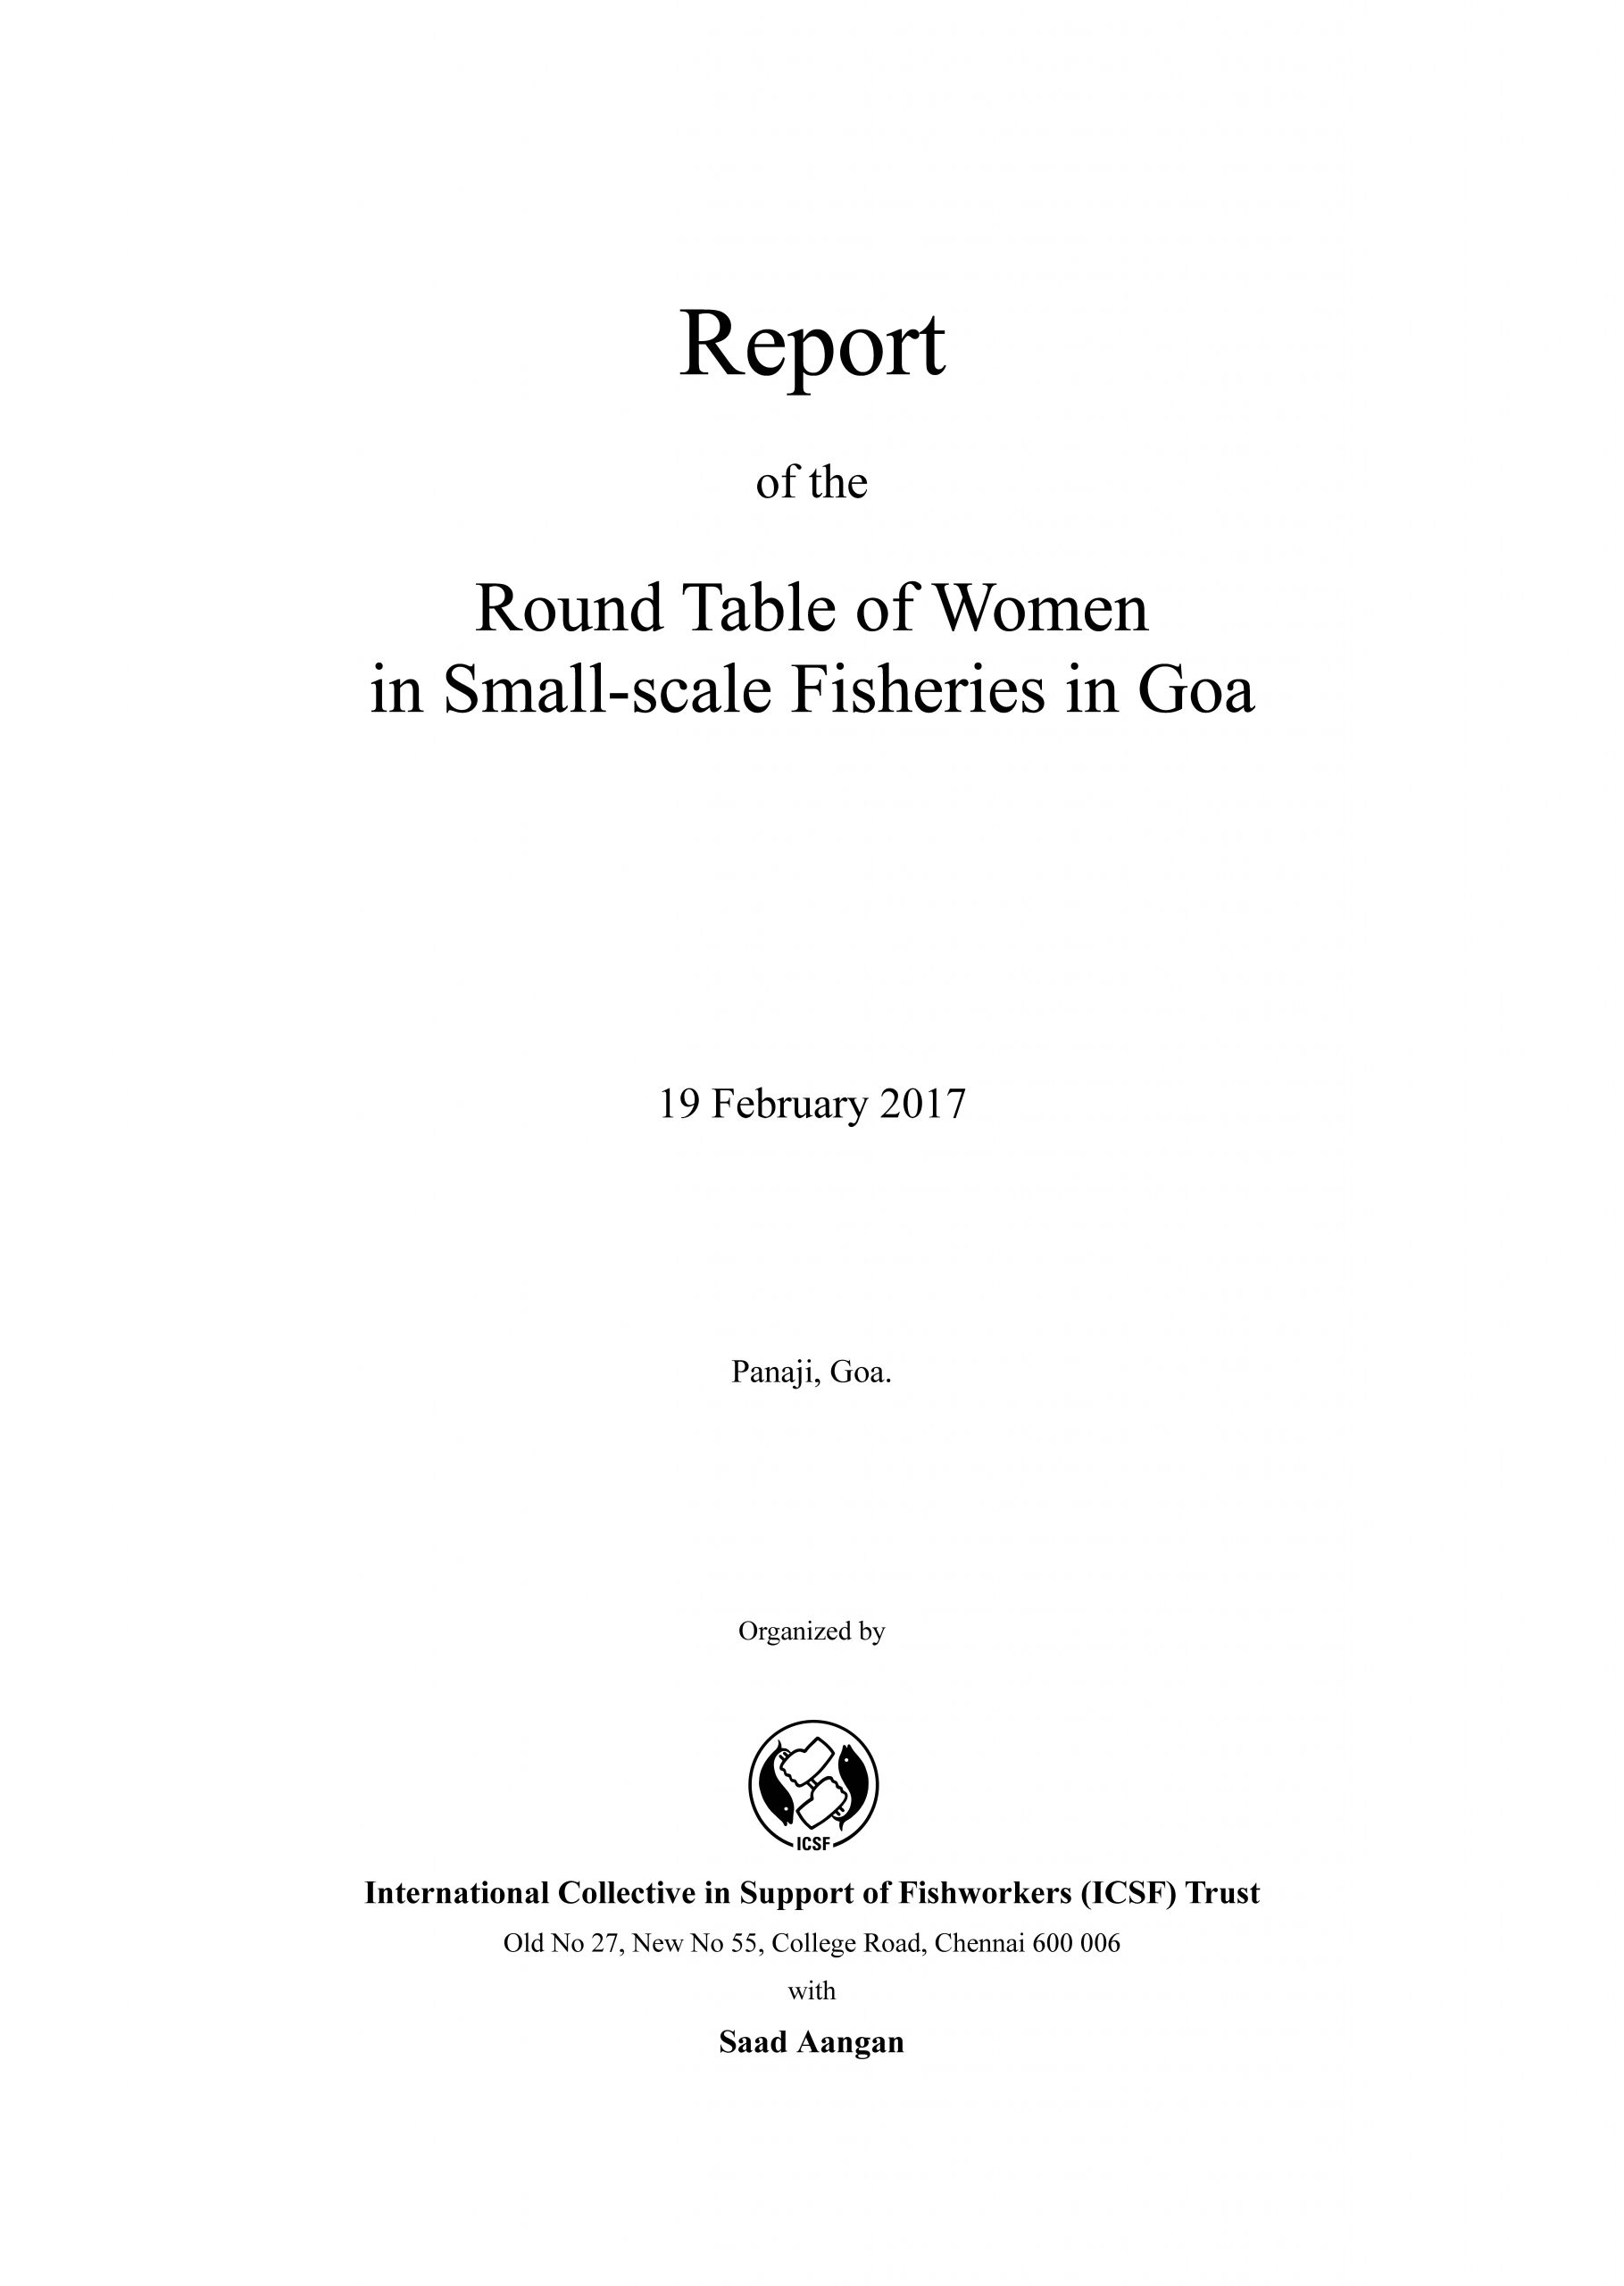 Report of the Round Table of Women in Small-scale Fisheries in Goa, 19 February 2017, Panaji, Goa. Organized by International Collective in Support of Fishworkers (ICSF) Trust with Saad Aangan